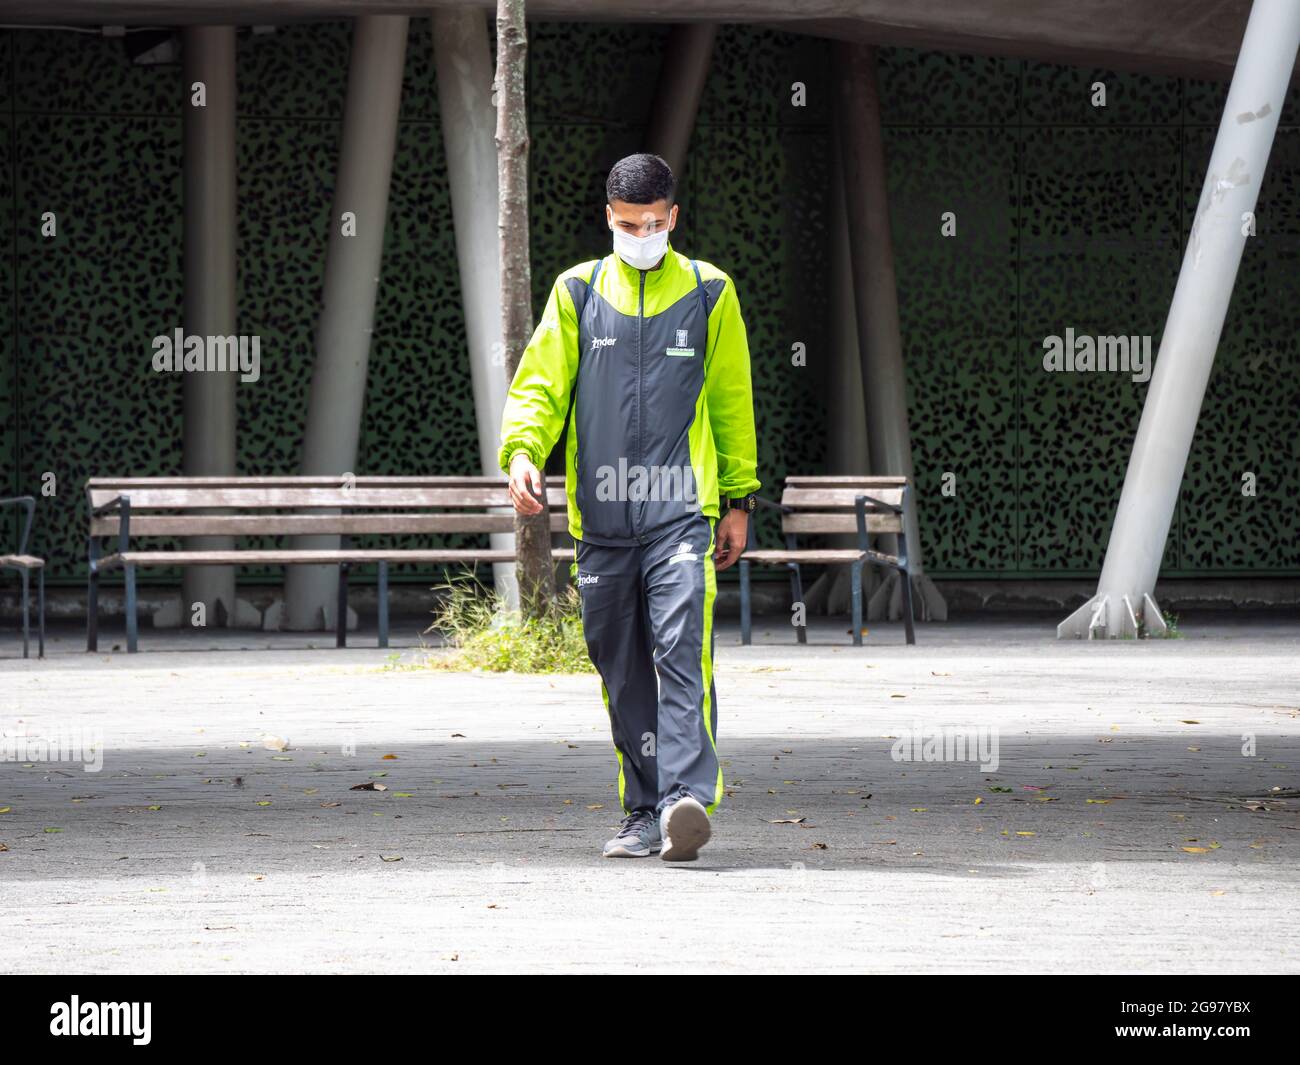 Medellin, Colombia - July 21 2021: Young Latin Men in a Fluorescent Outfit Walks in a Public Park and Stares Stock Photo